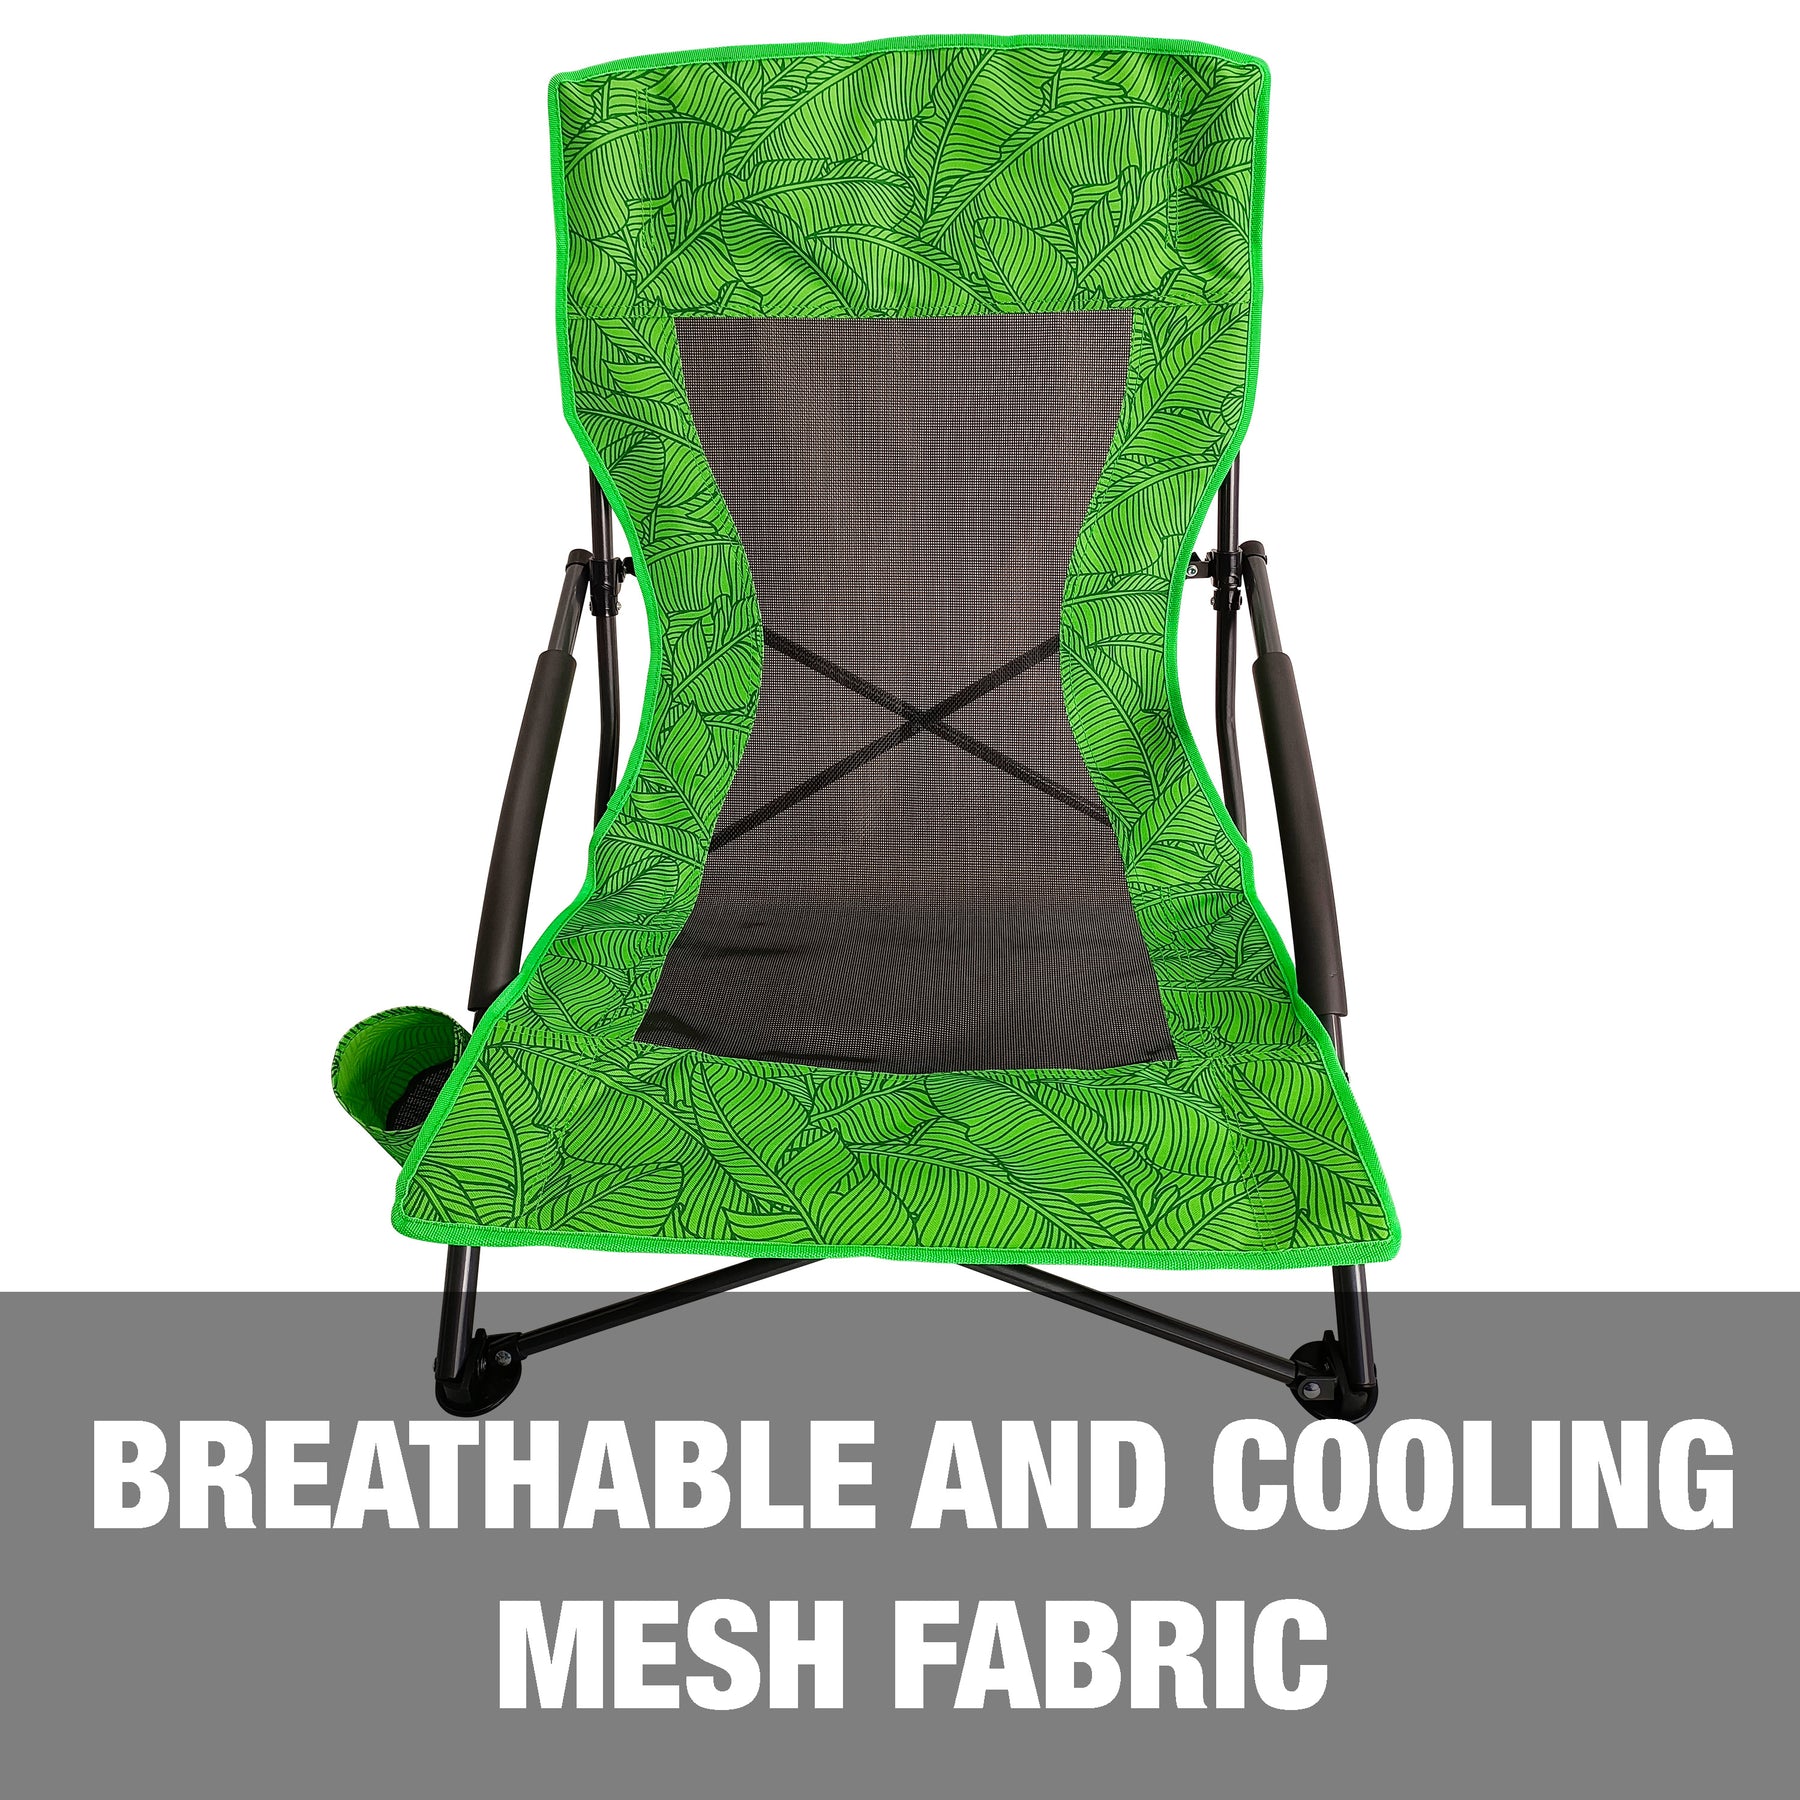 Bliss Hammocks Collapsible Beach Chair is breathable with a cooling mesh fabric.